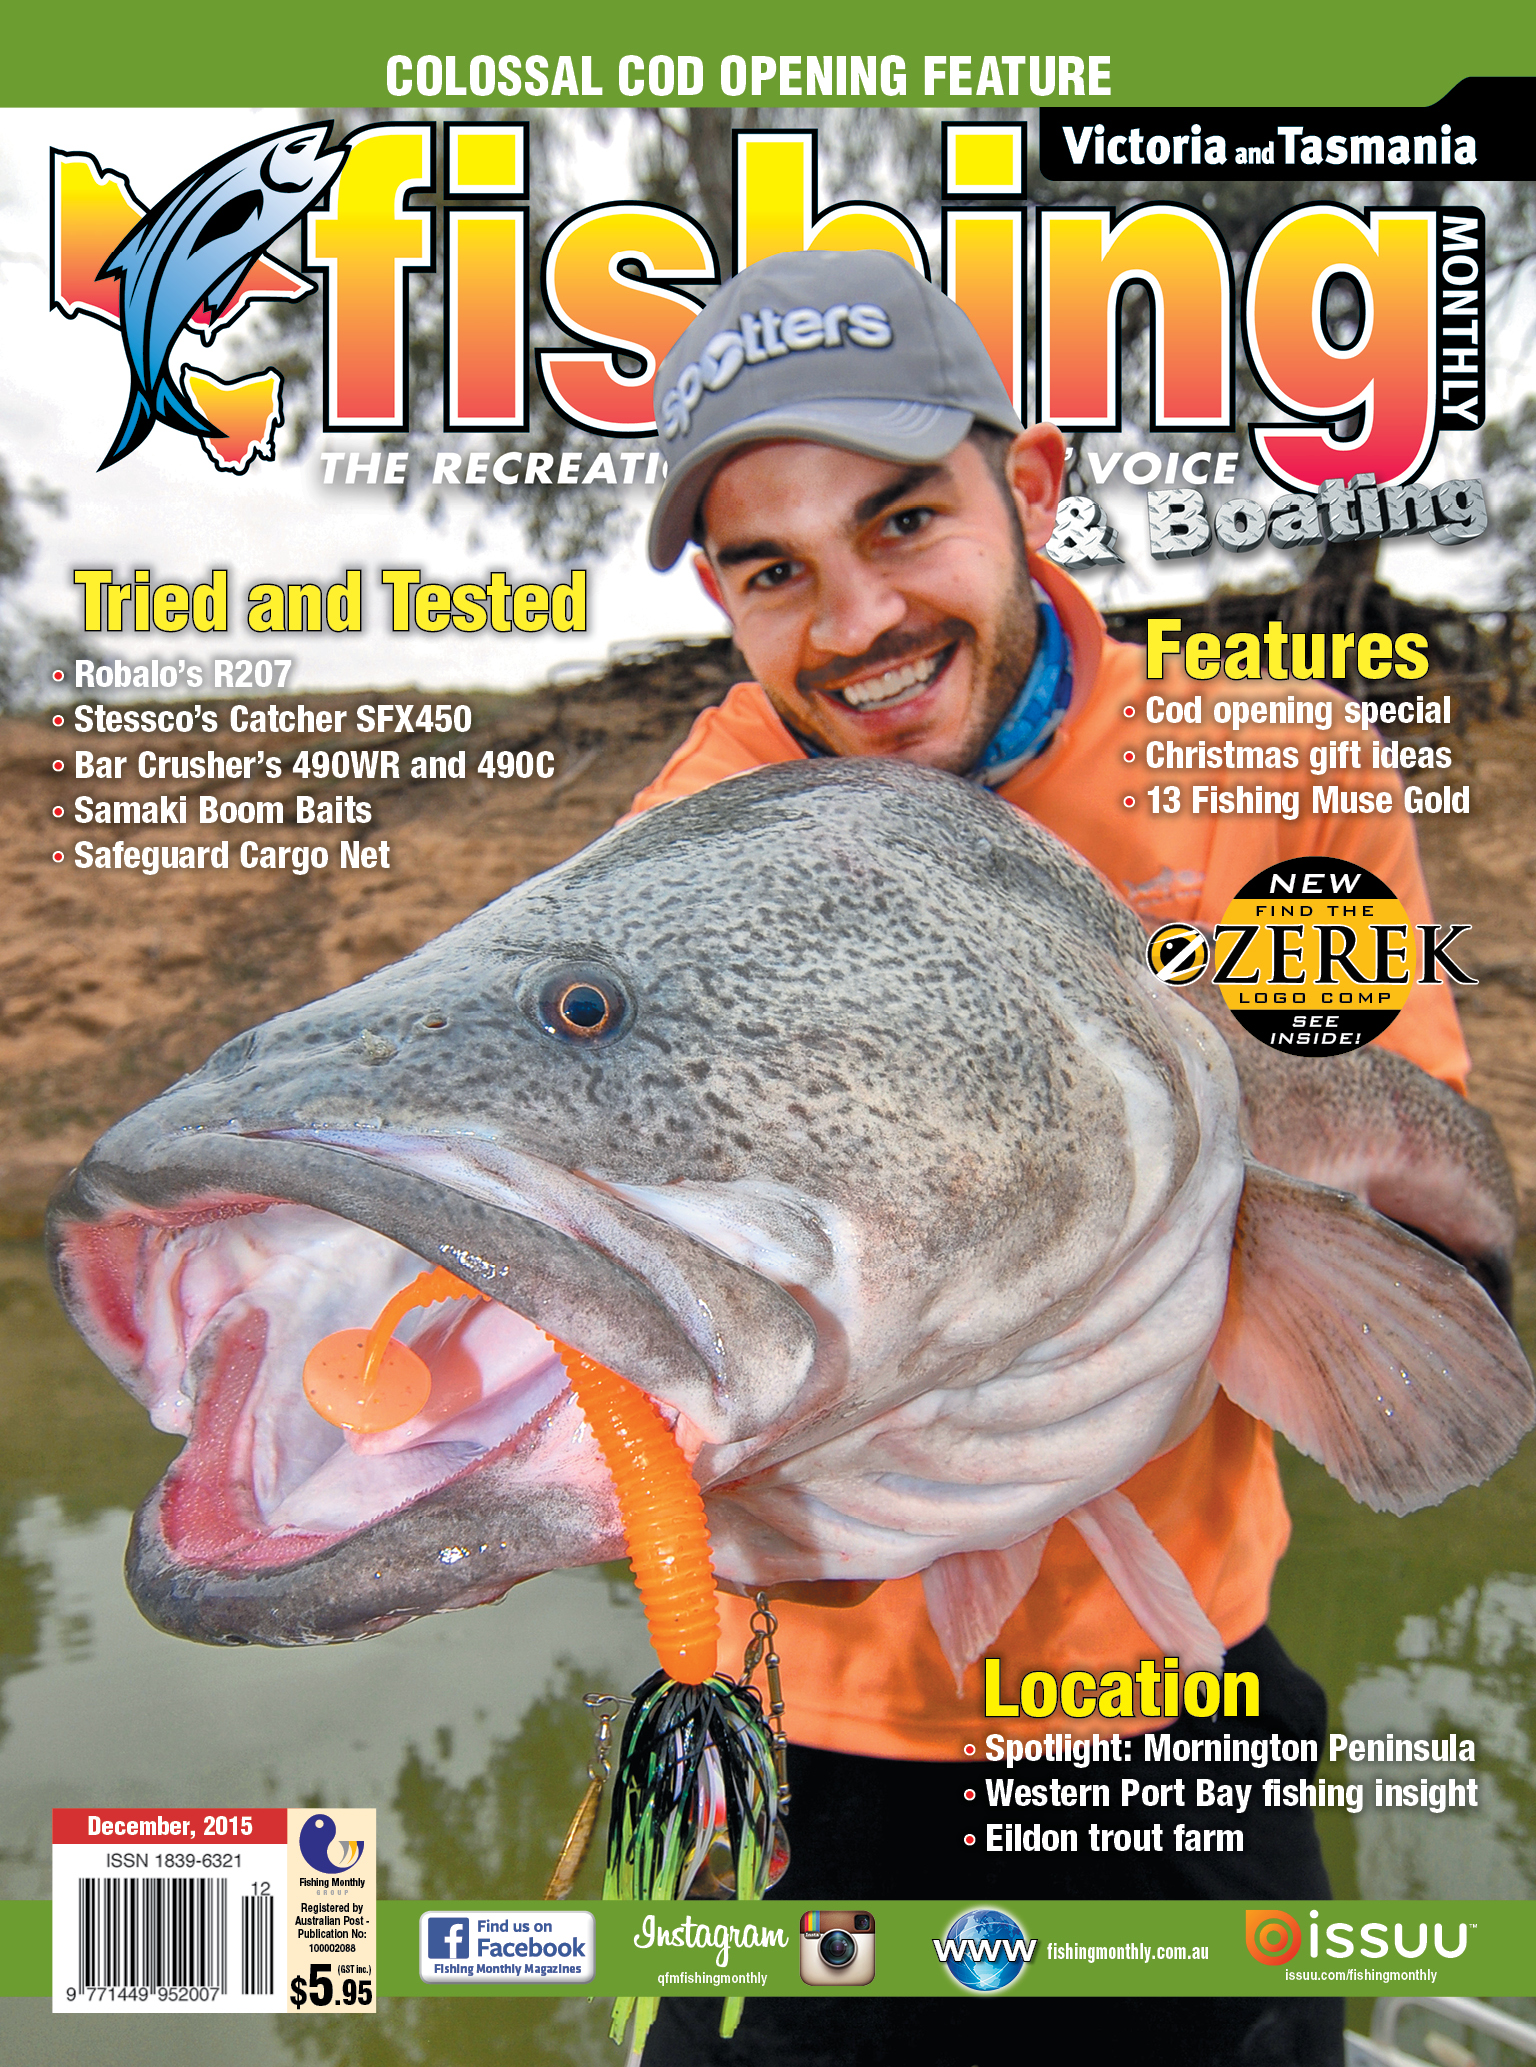 Fishing Monthly Magazines : Rigs, rigging and baiting for Victoria